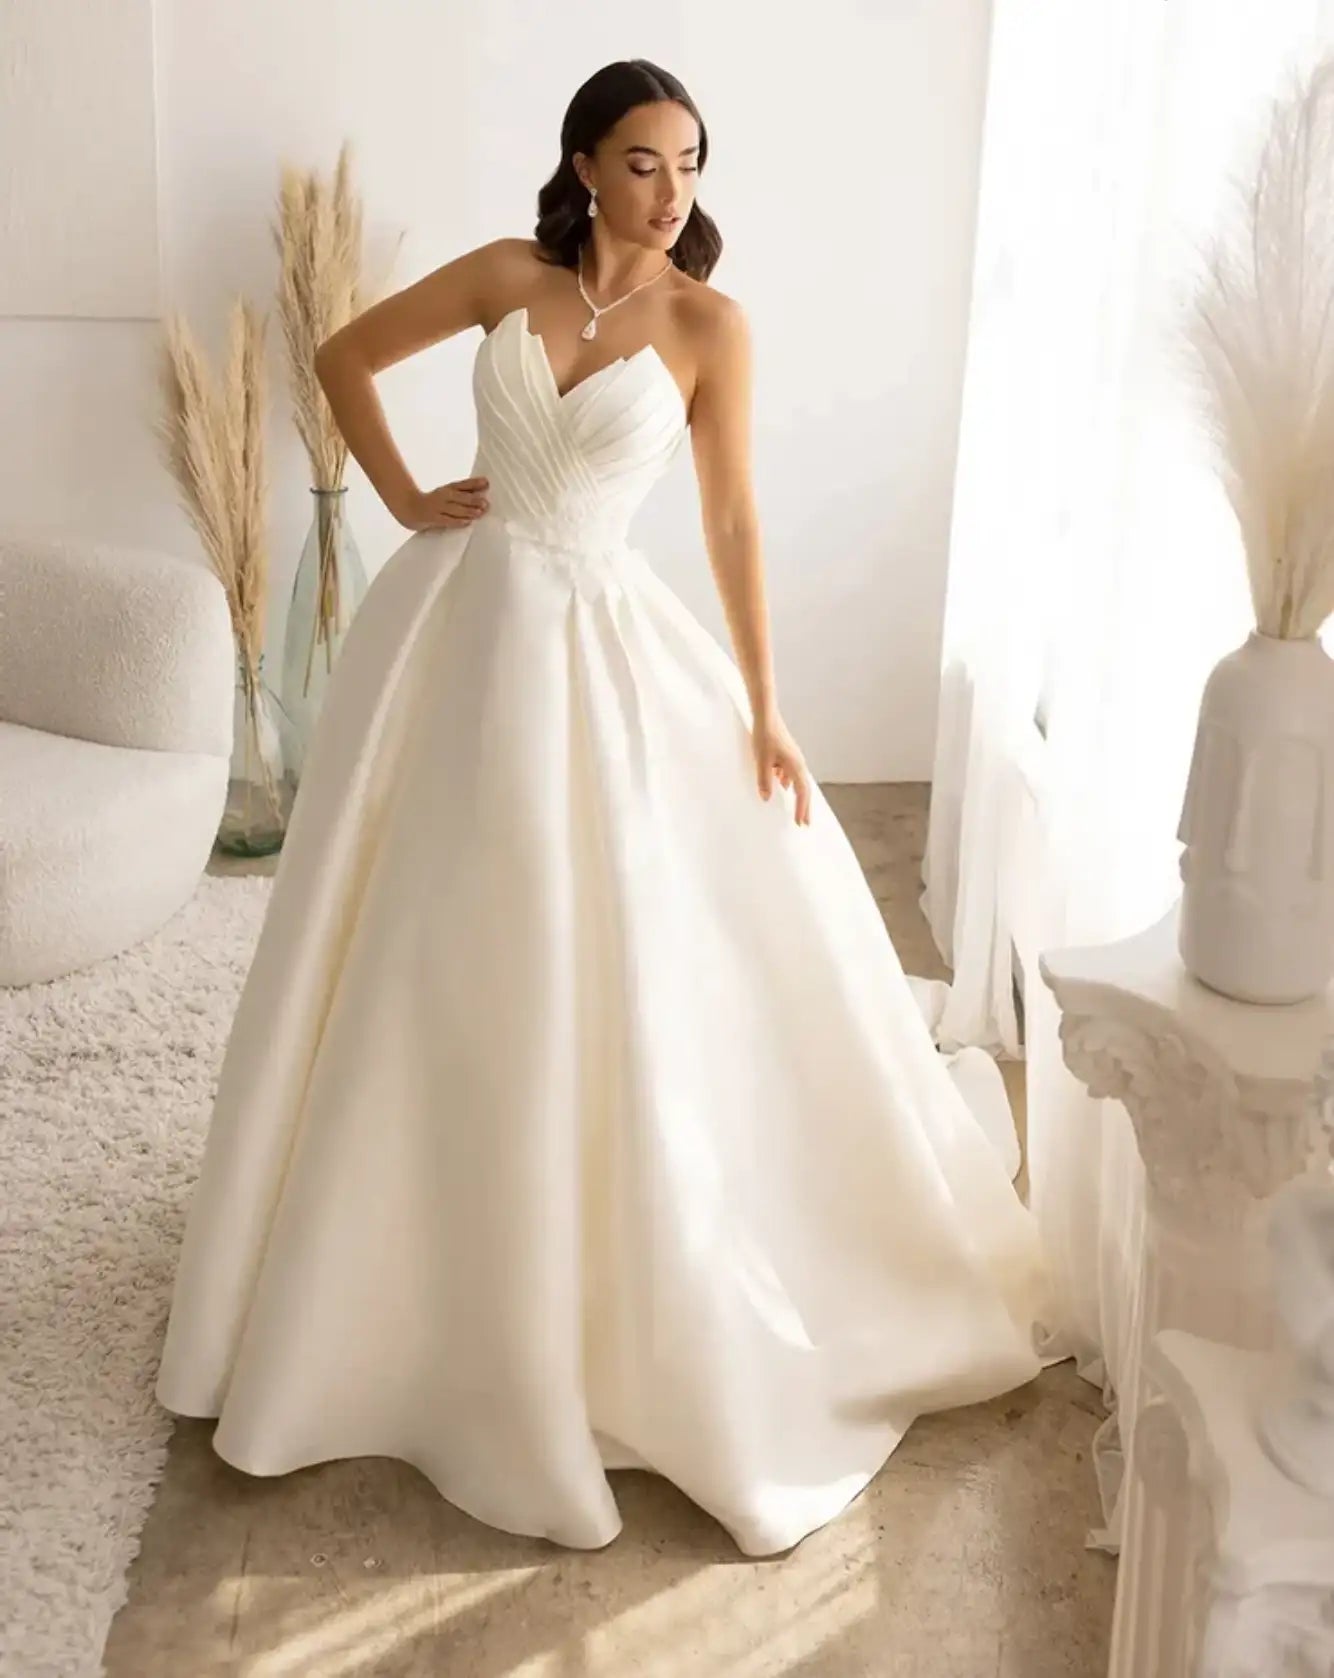 Simple Ivory Satin A-line Sweetheart Wedding Dress MW701 | Musebridals